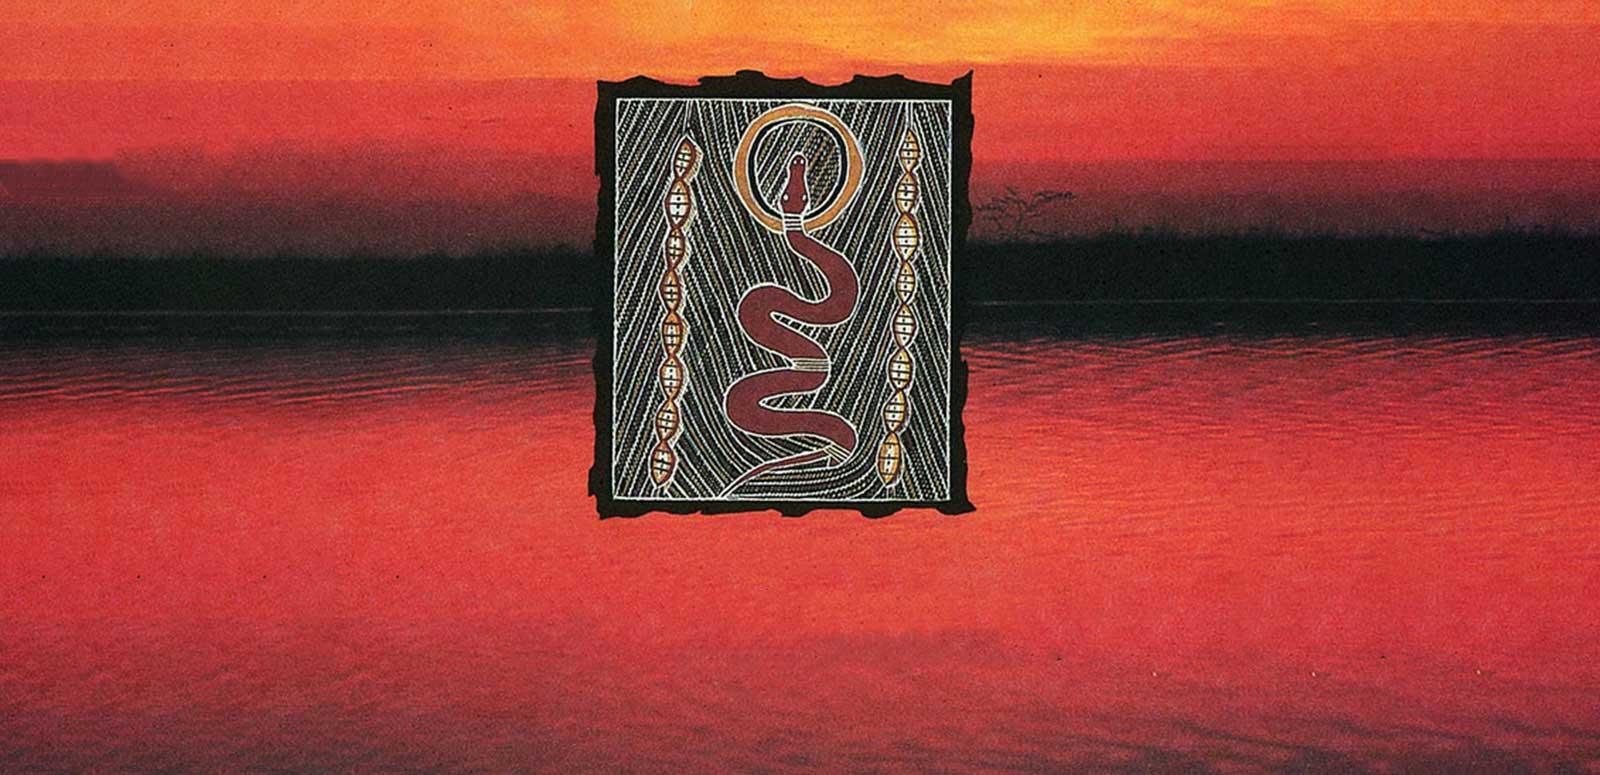 An Aboriginal drawing of a snake surrounded by symbols and a striped and dotted pattern against a red and black sunset